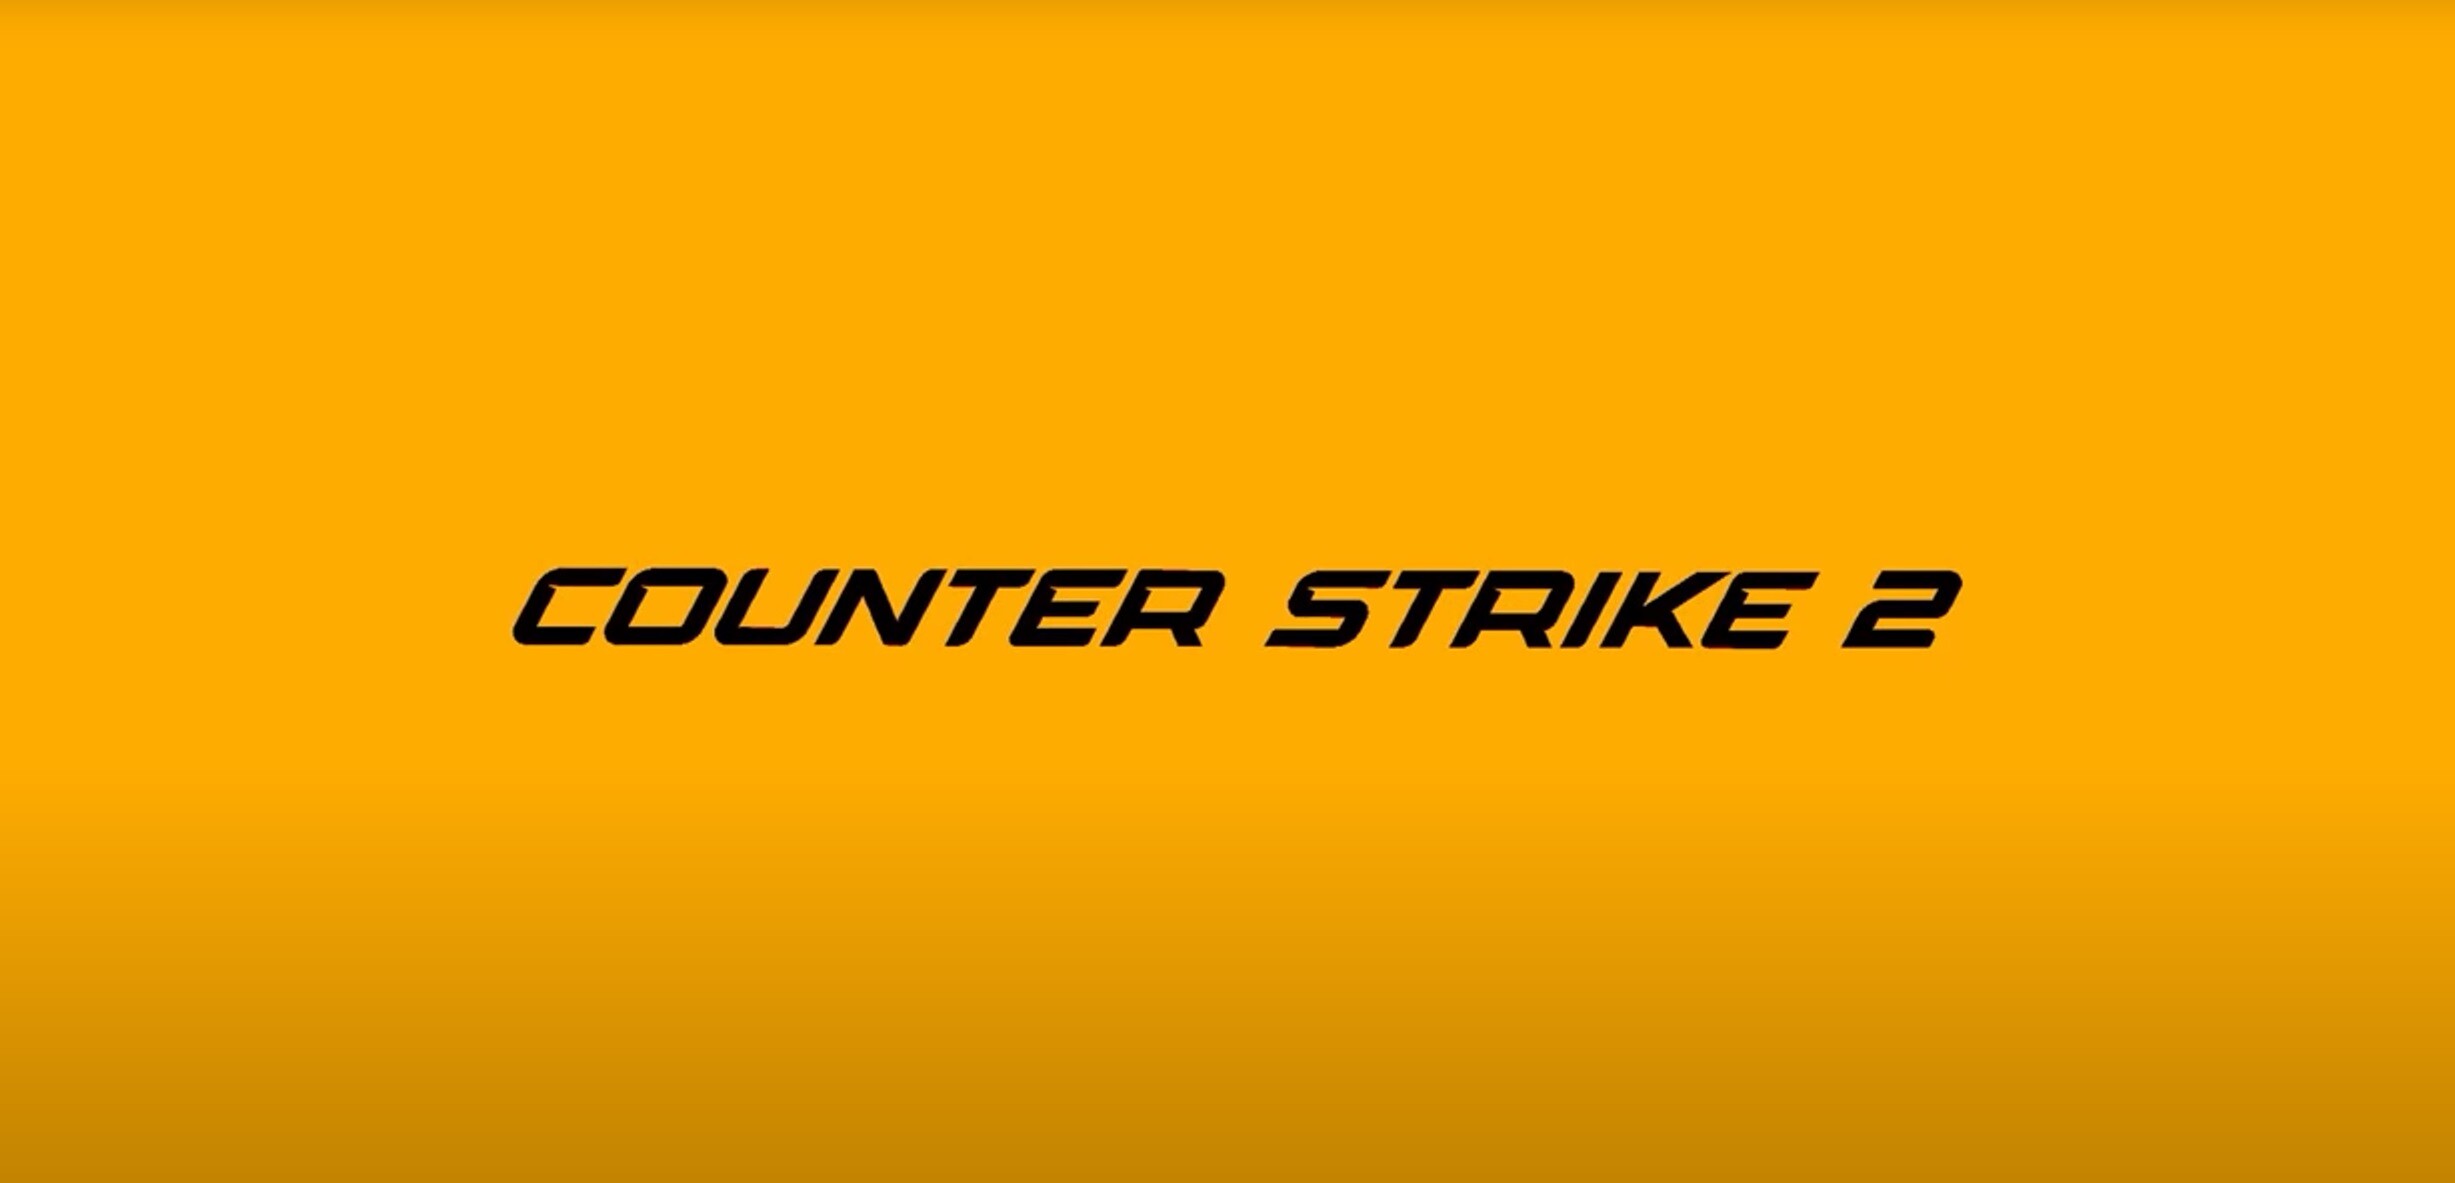 Counter Strike 2 Launched!!